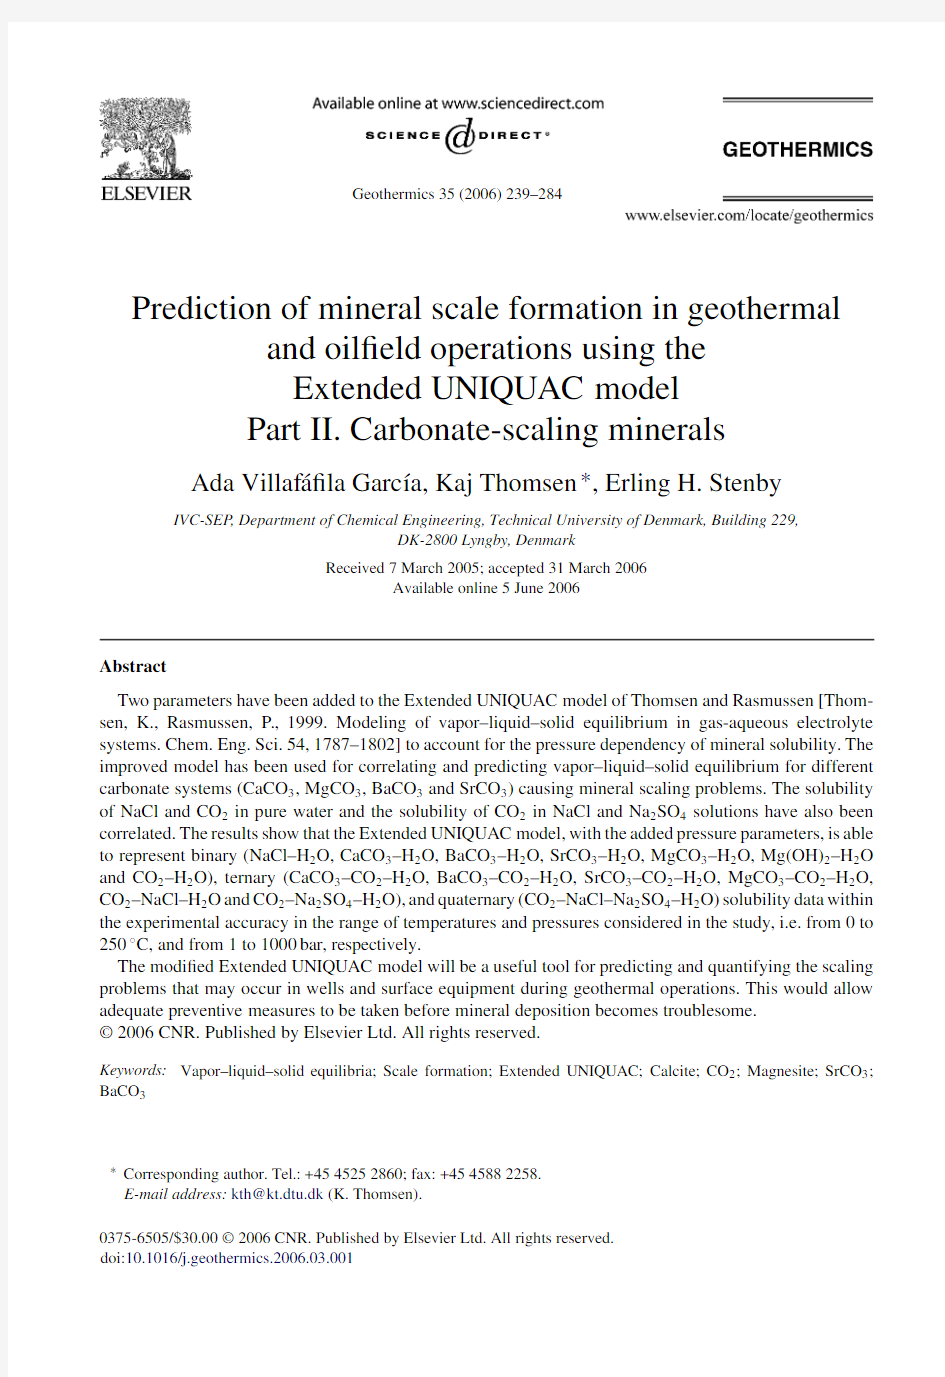 Prediction of mineral scale formation in geothermal and oilfield operations using the  UNIQUAC model